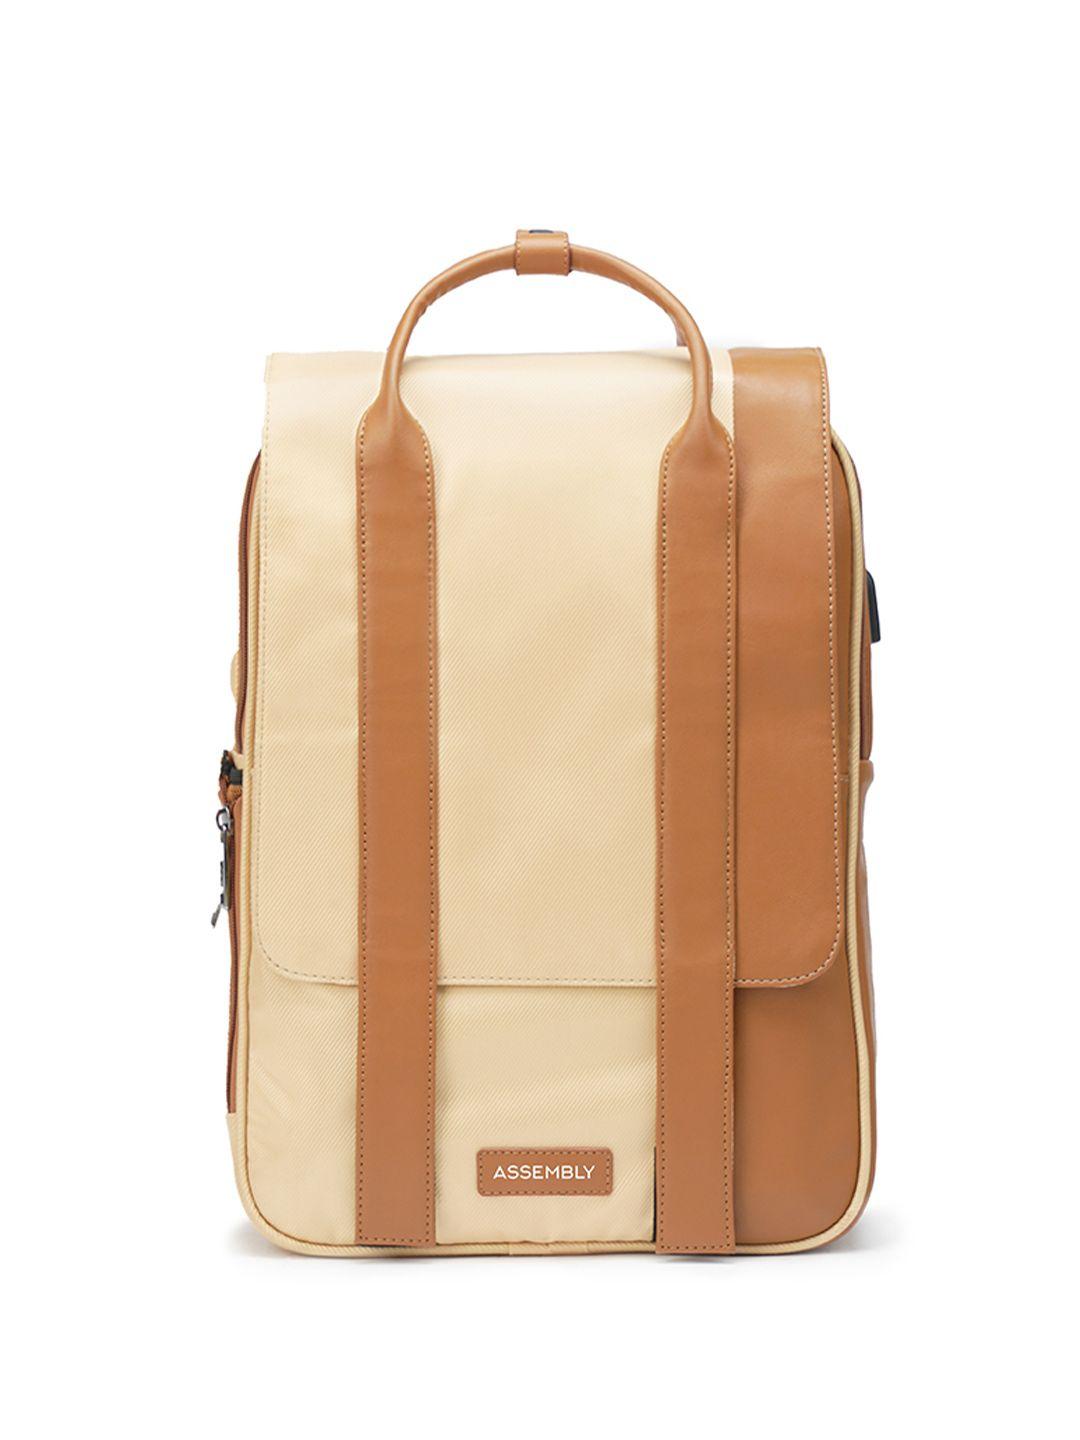 assembly unisex beige & cream-coloured backpack with usb charging port